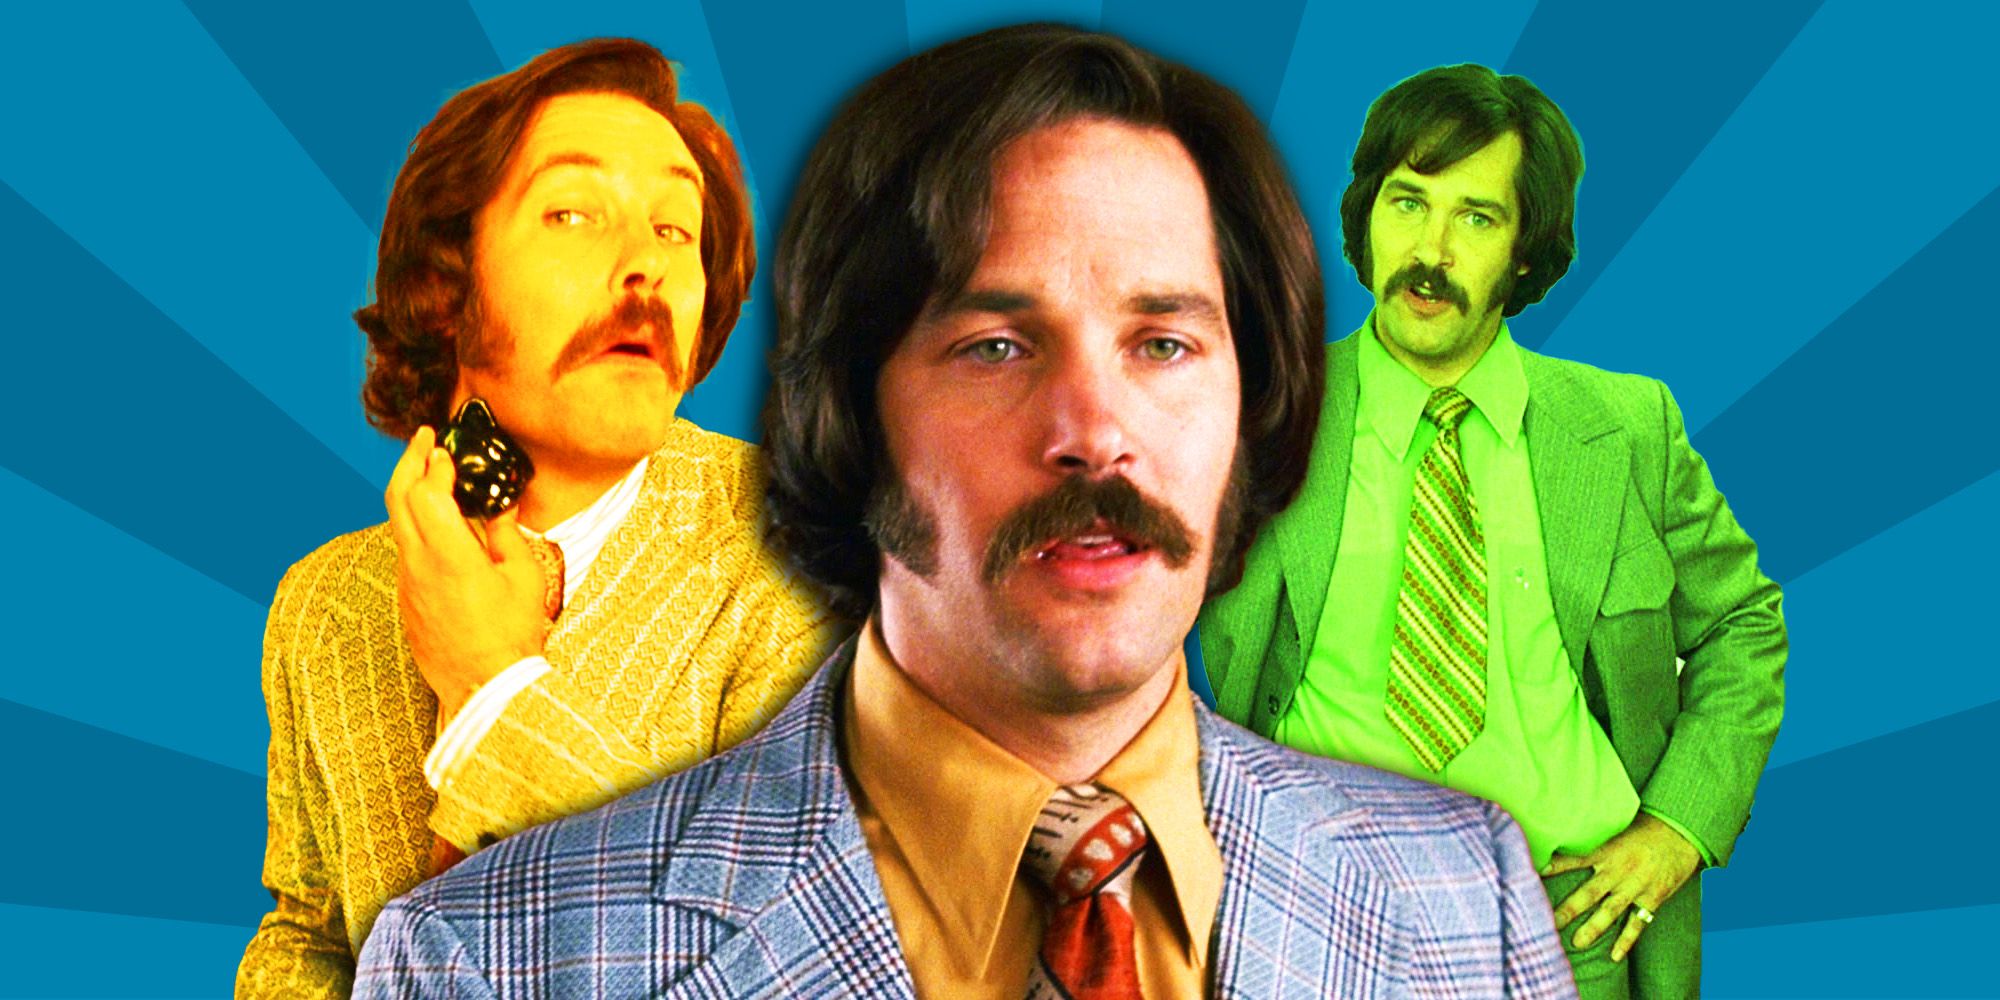 Collage of Paul Rudd as Brian Fantana in Anchorman- The Legend of Ron Burgundy